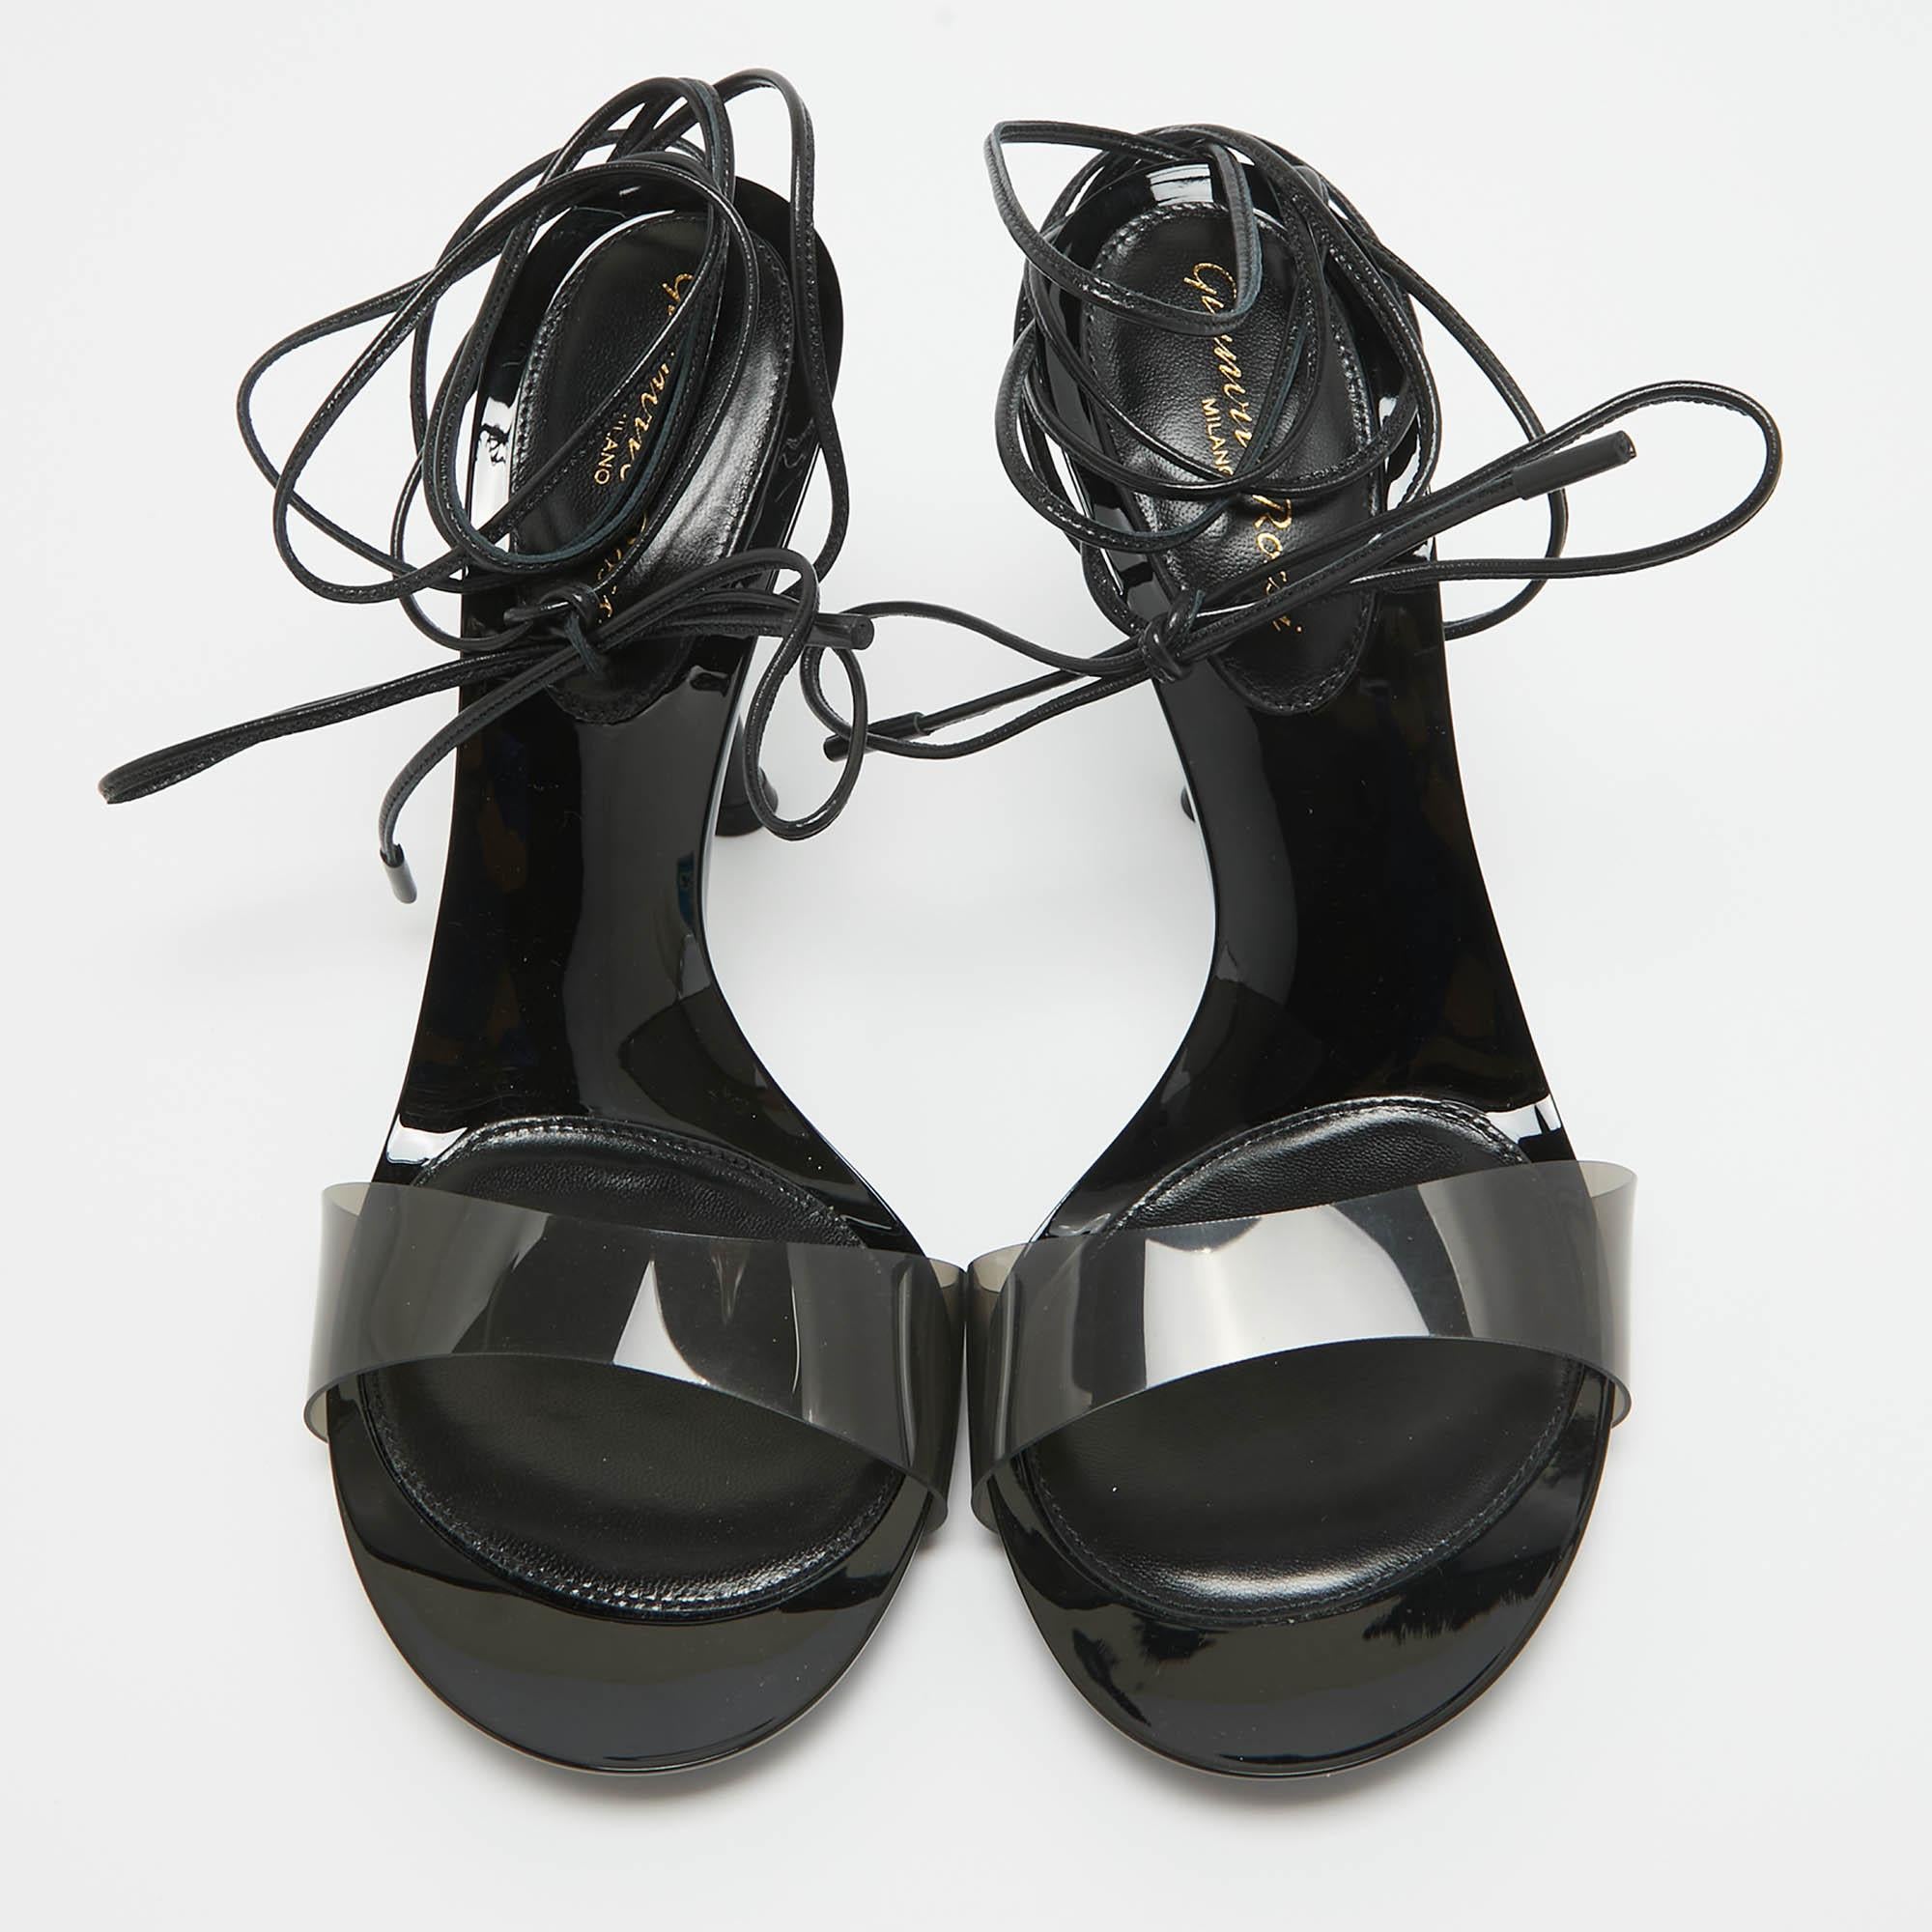 Indulge in luxury with Gianvito Rossi's Spice ankle tie Sandals. Crafted with meticulous attention to detail, these sandals boast a captivating blend of PVC and black leather, culminating in a sophisticated ankle tie design that exudes elegance and